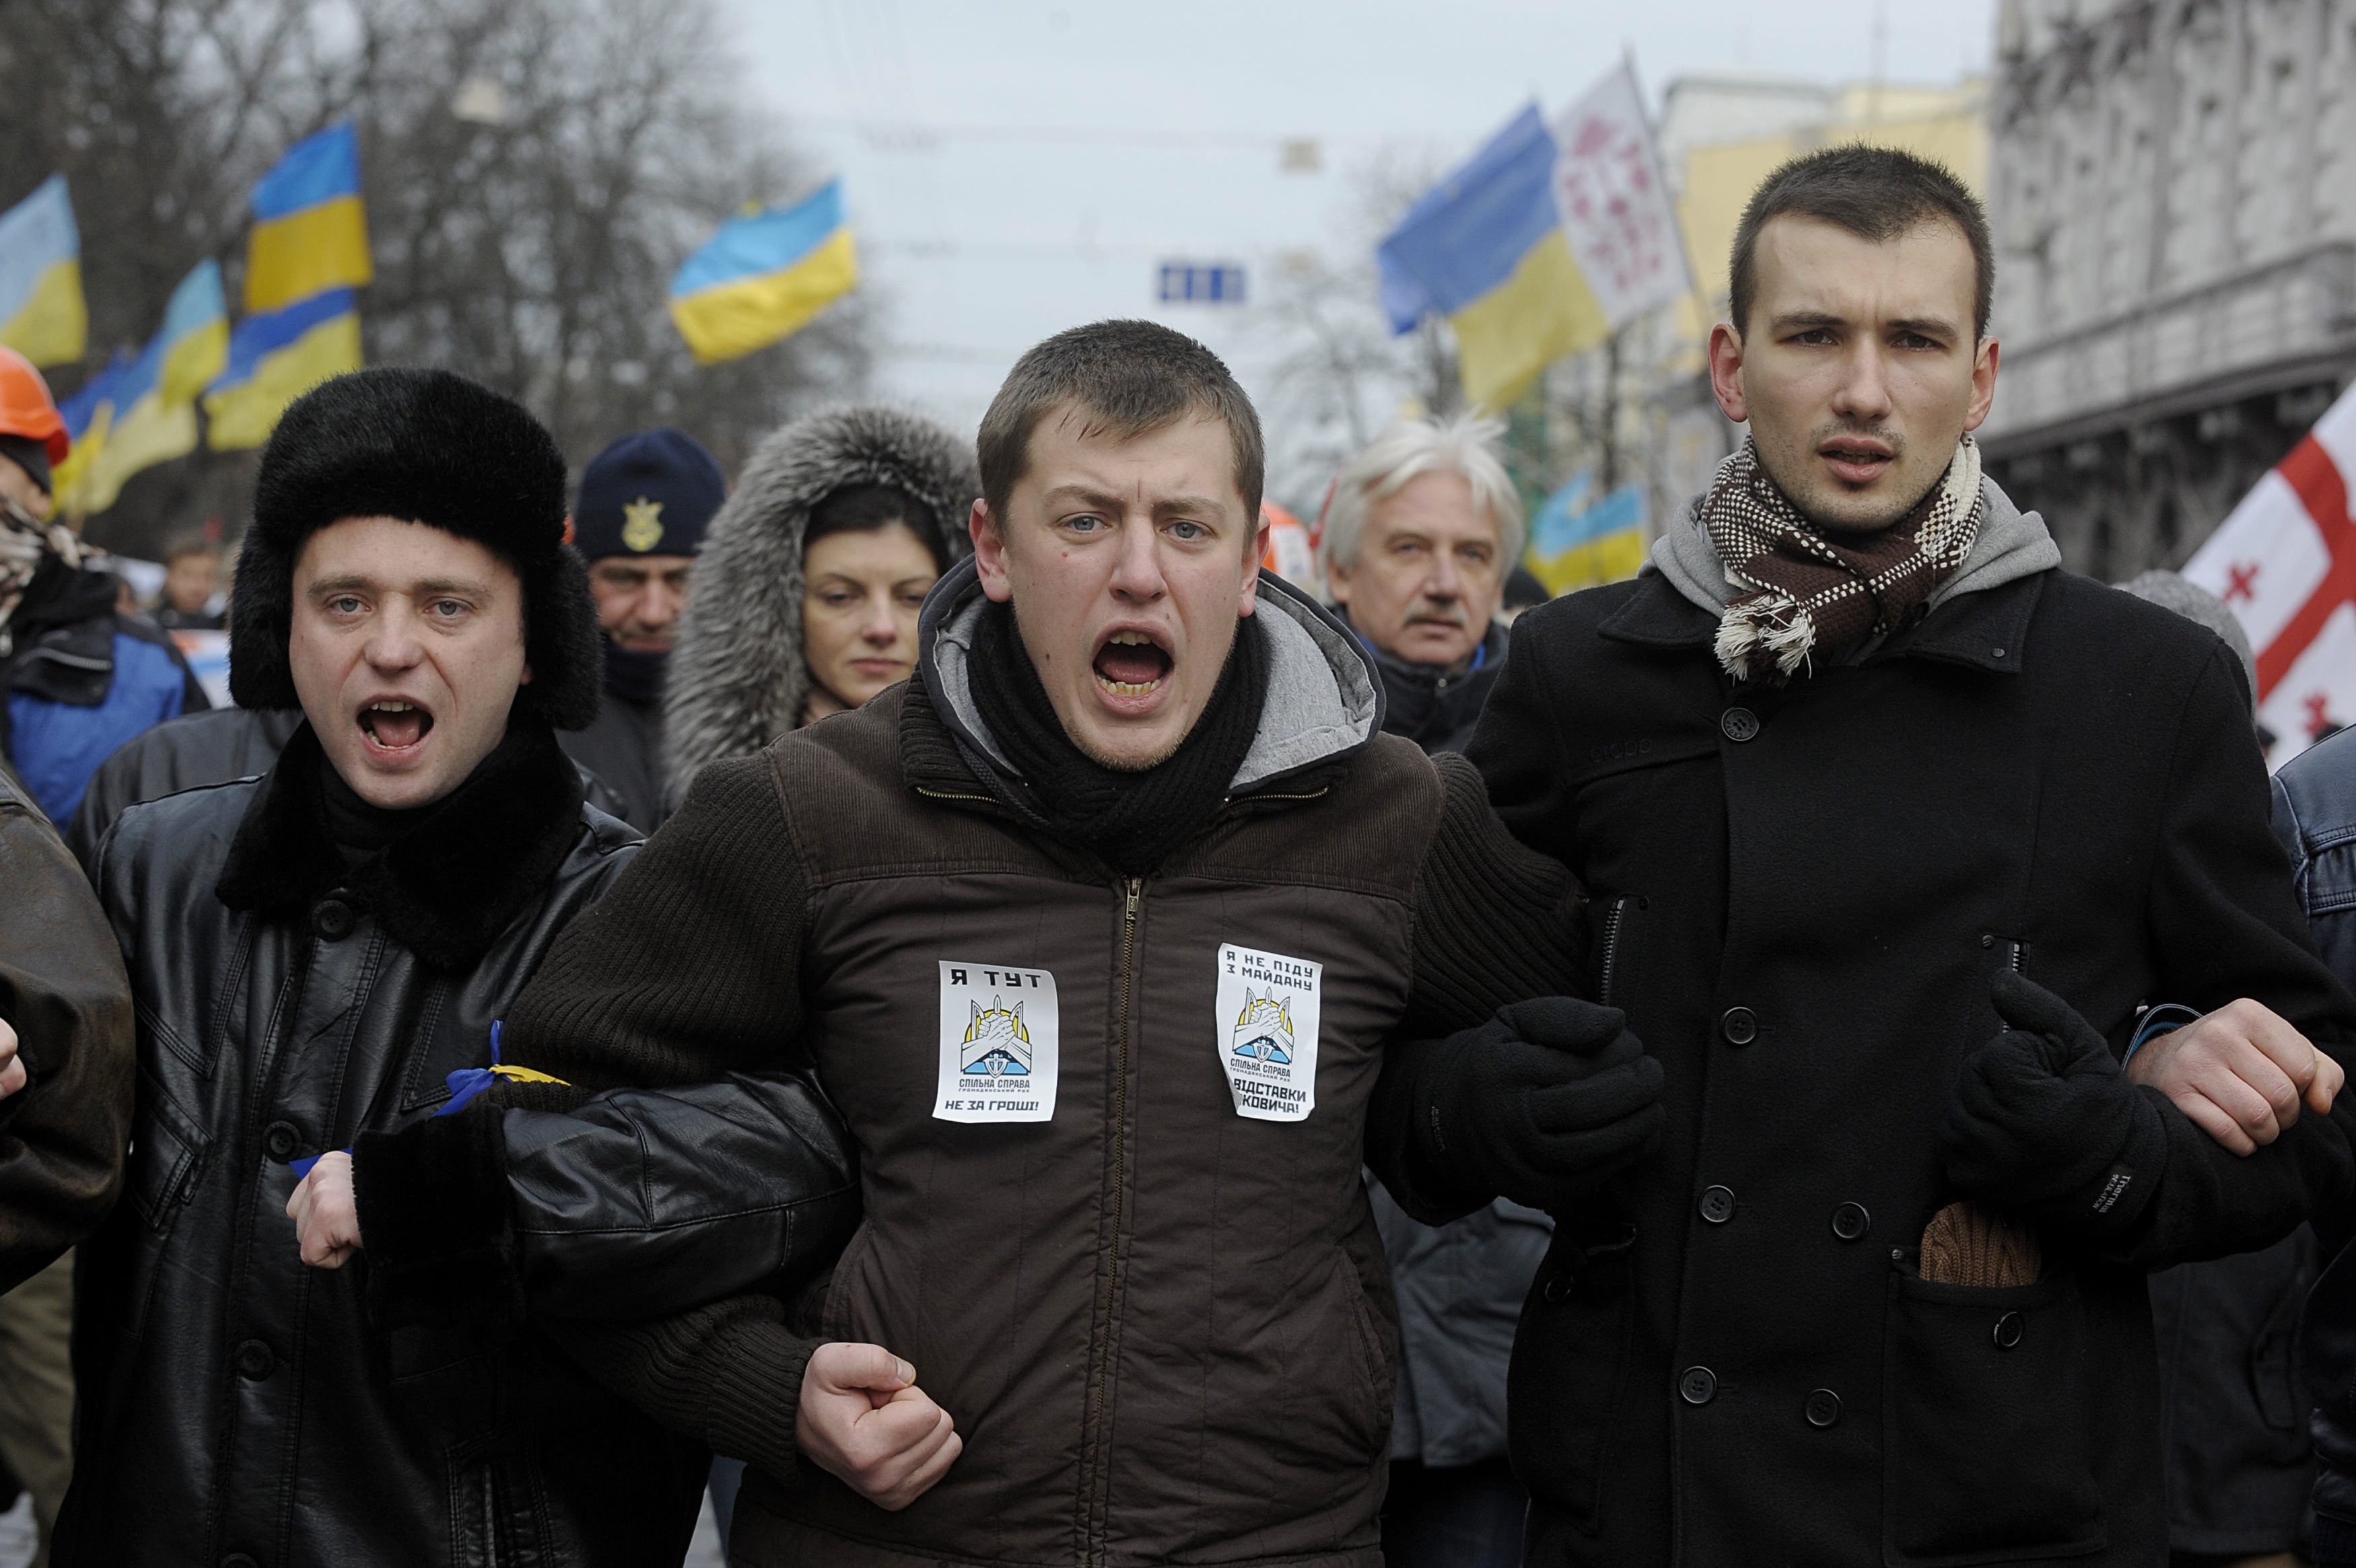 Protesters shout slogans as they march through Kiev. Photo: EPA